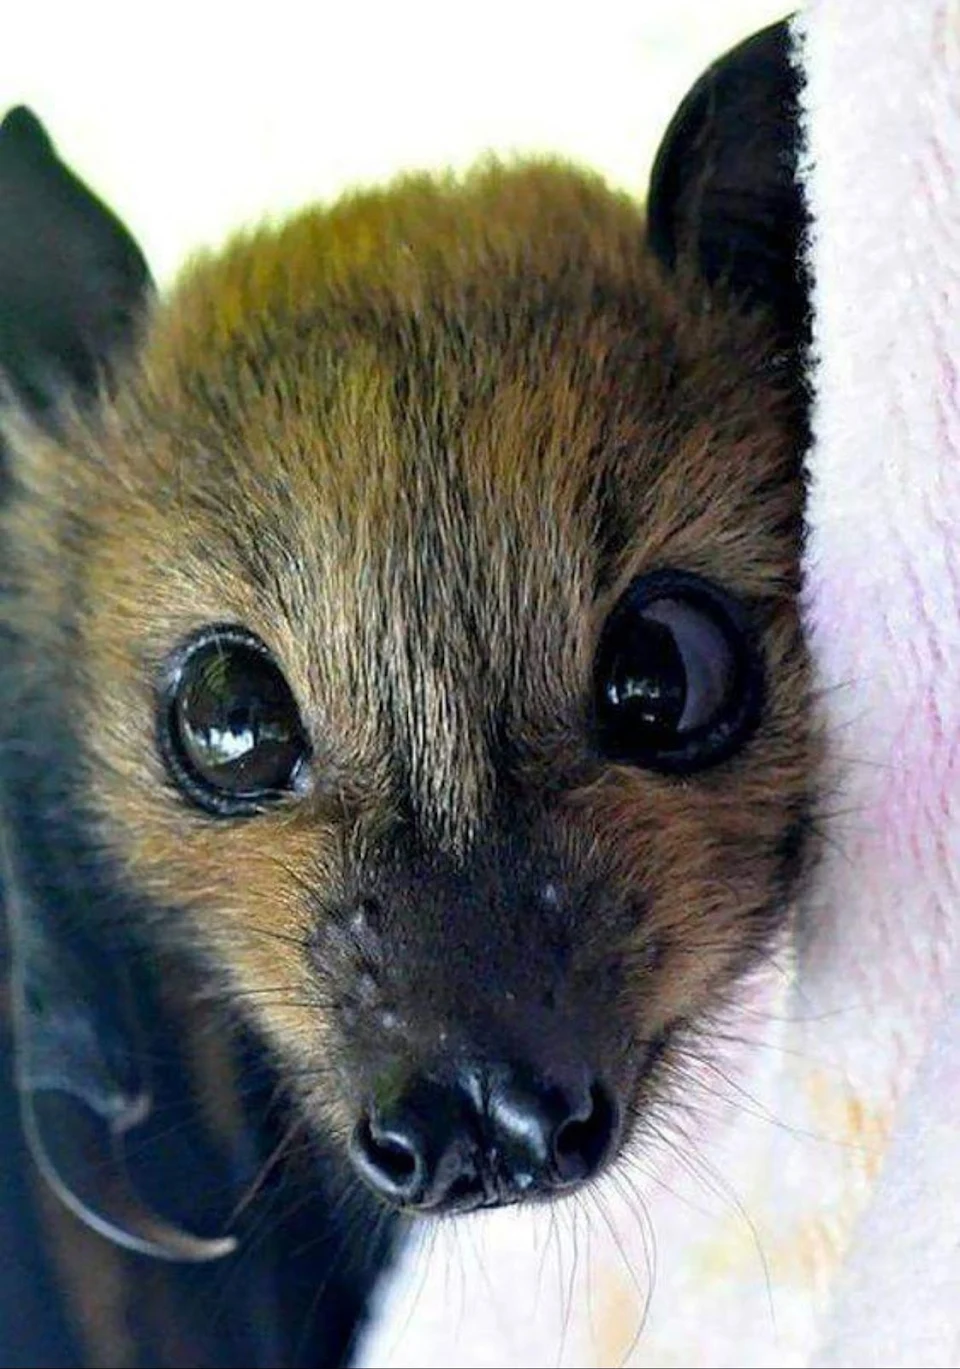 Benny the gray-headed fruit bat wants to tell you to take it easy today.